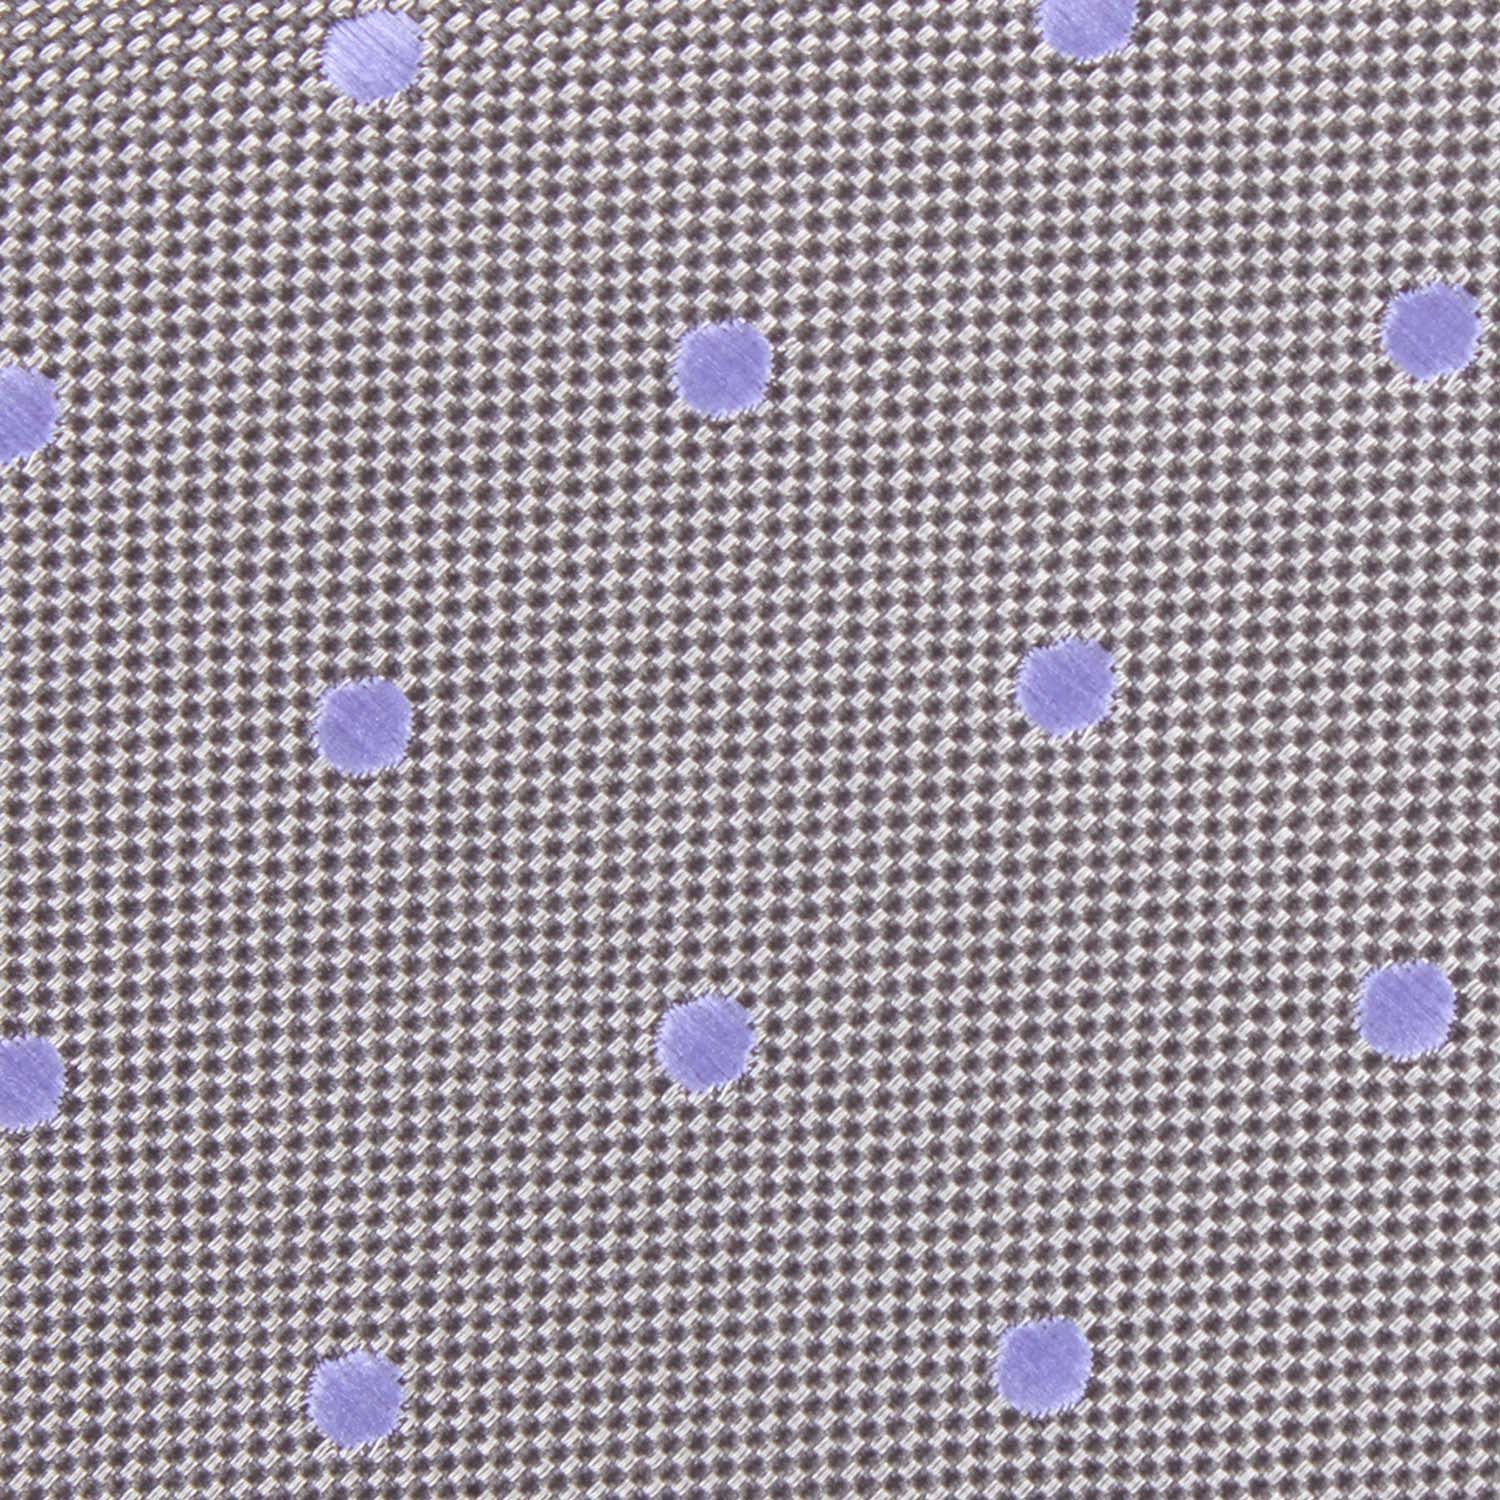 Grey with Lavender Purple Polka Dots Fabric Kids Bow Tie M116